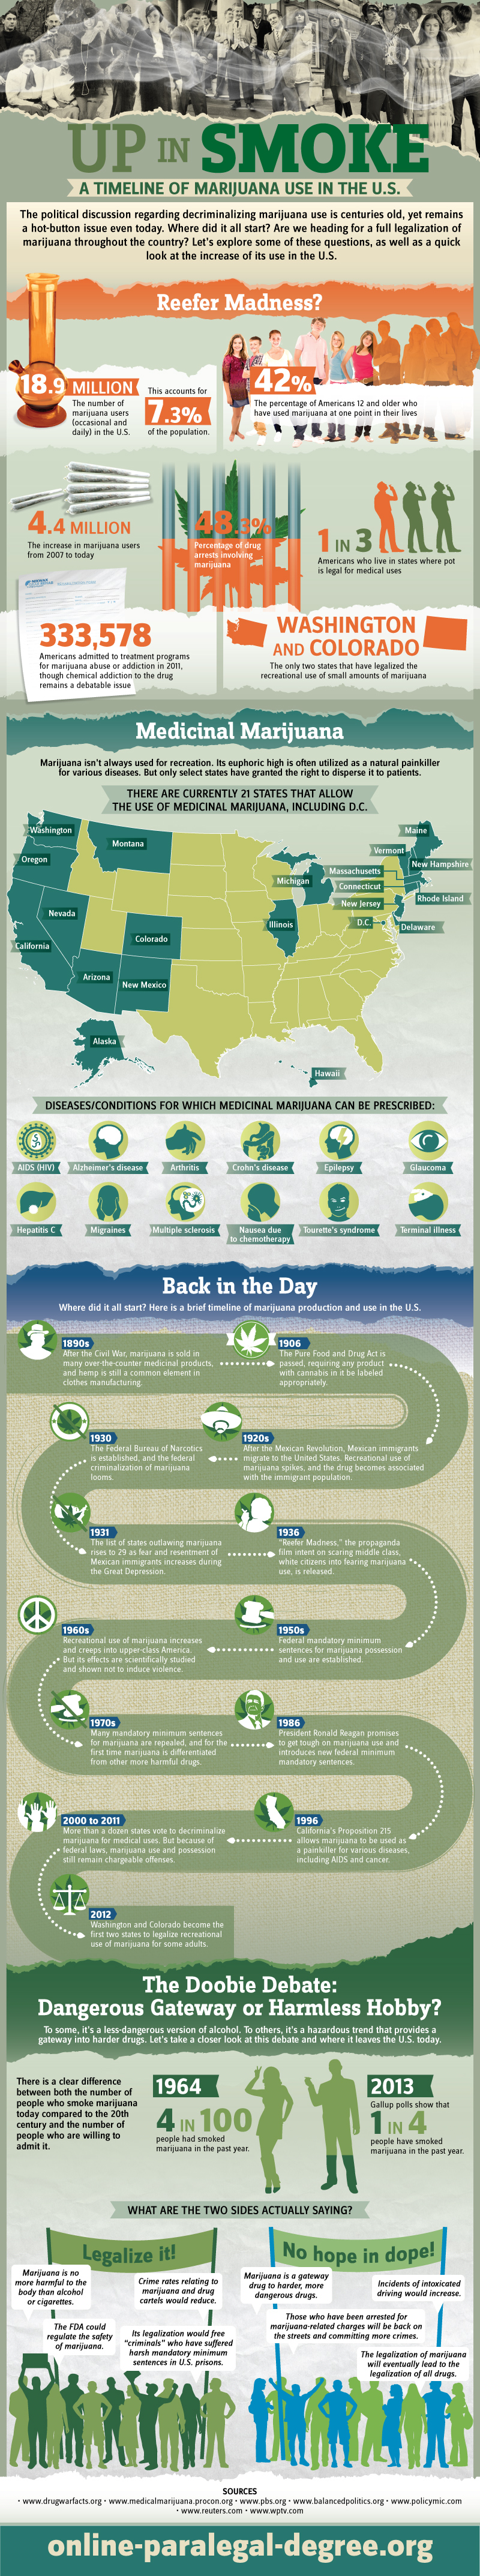 Up in Smoke [Infographic]